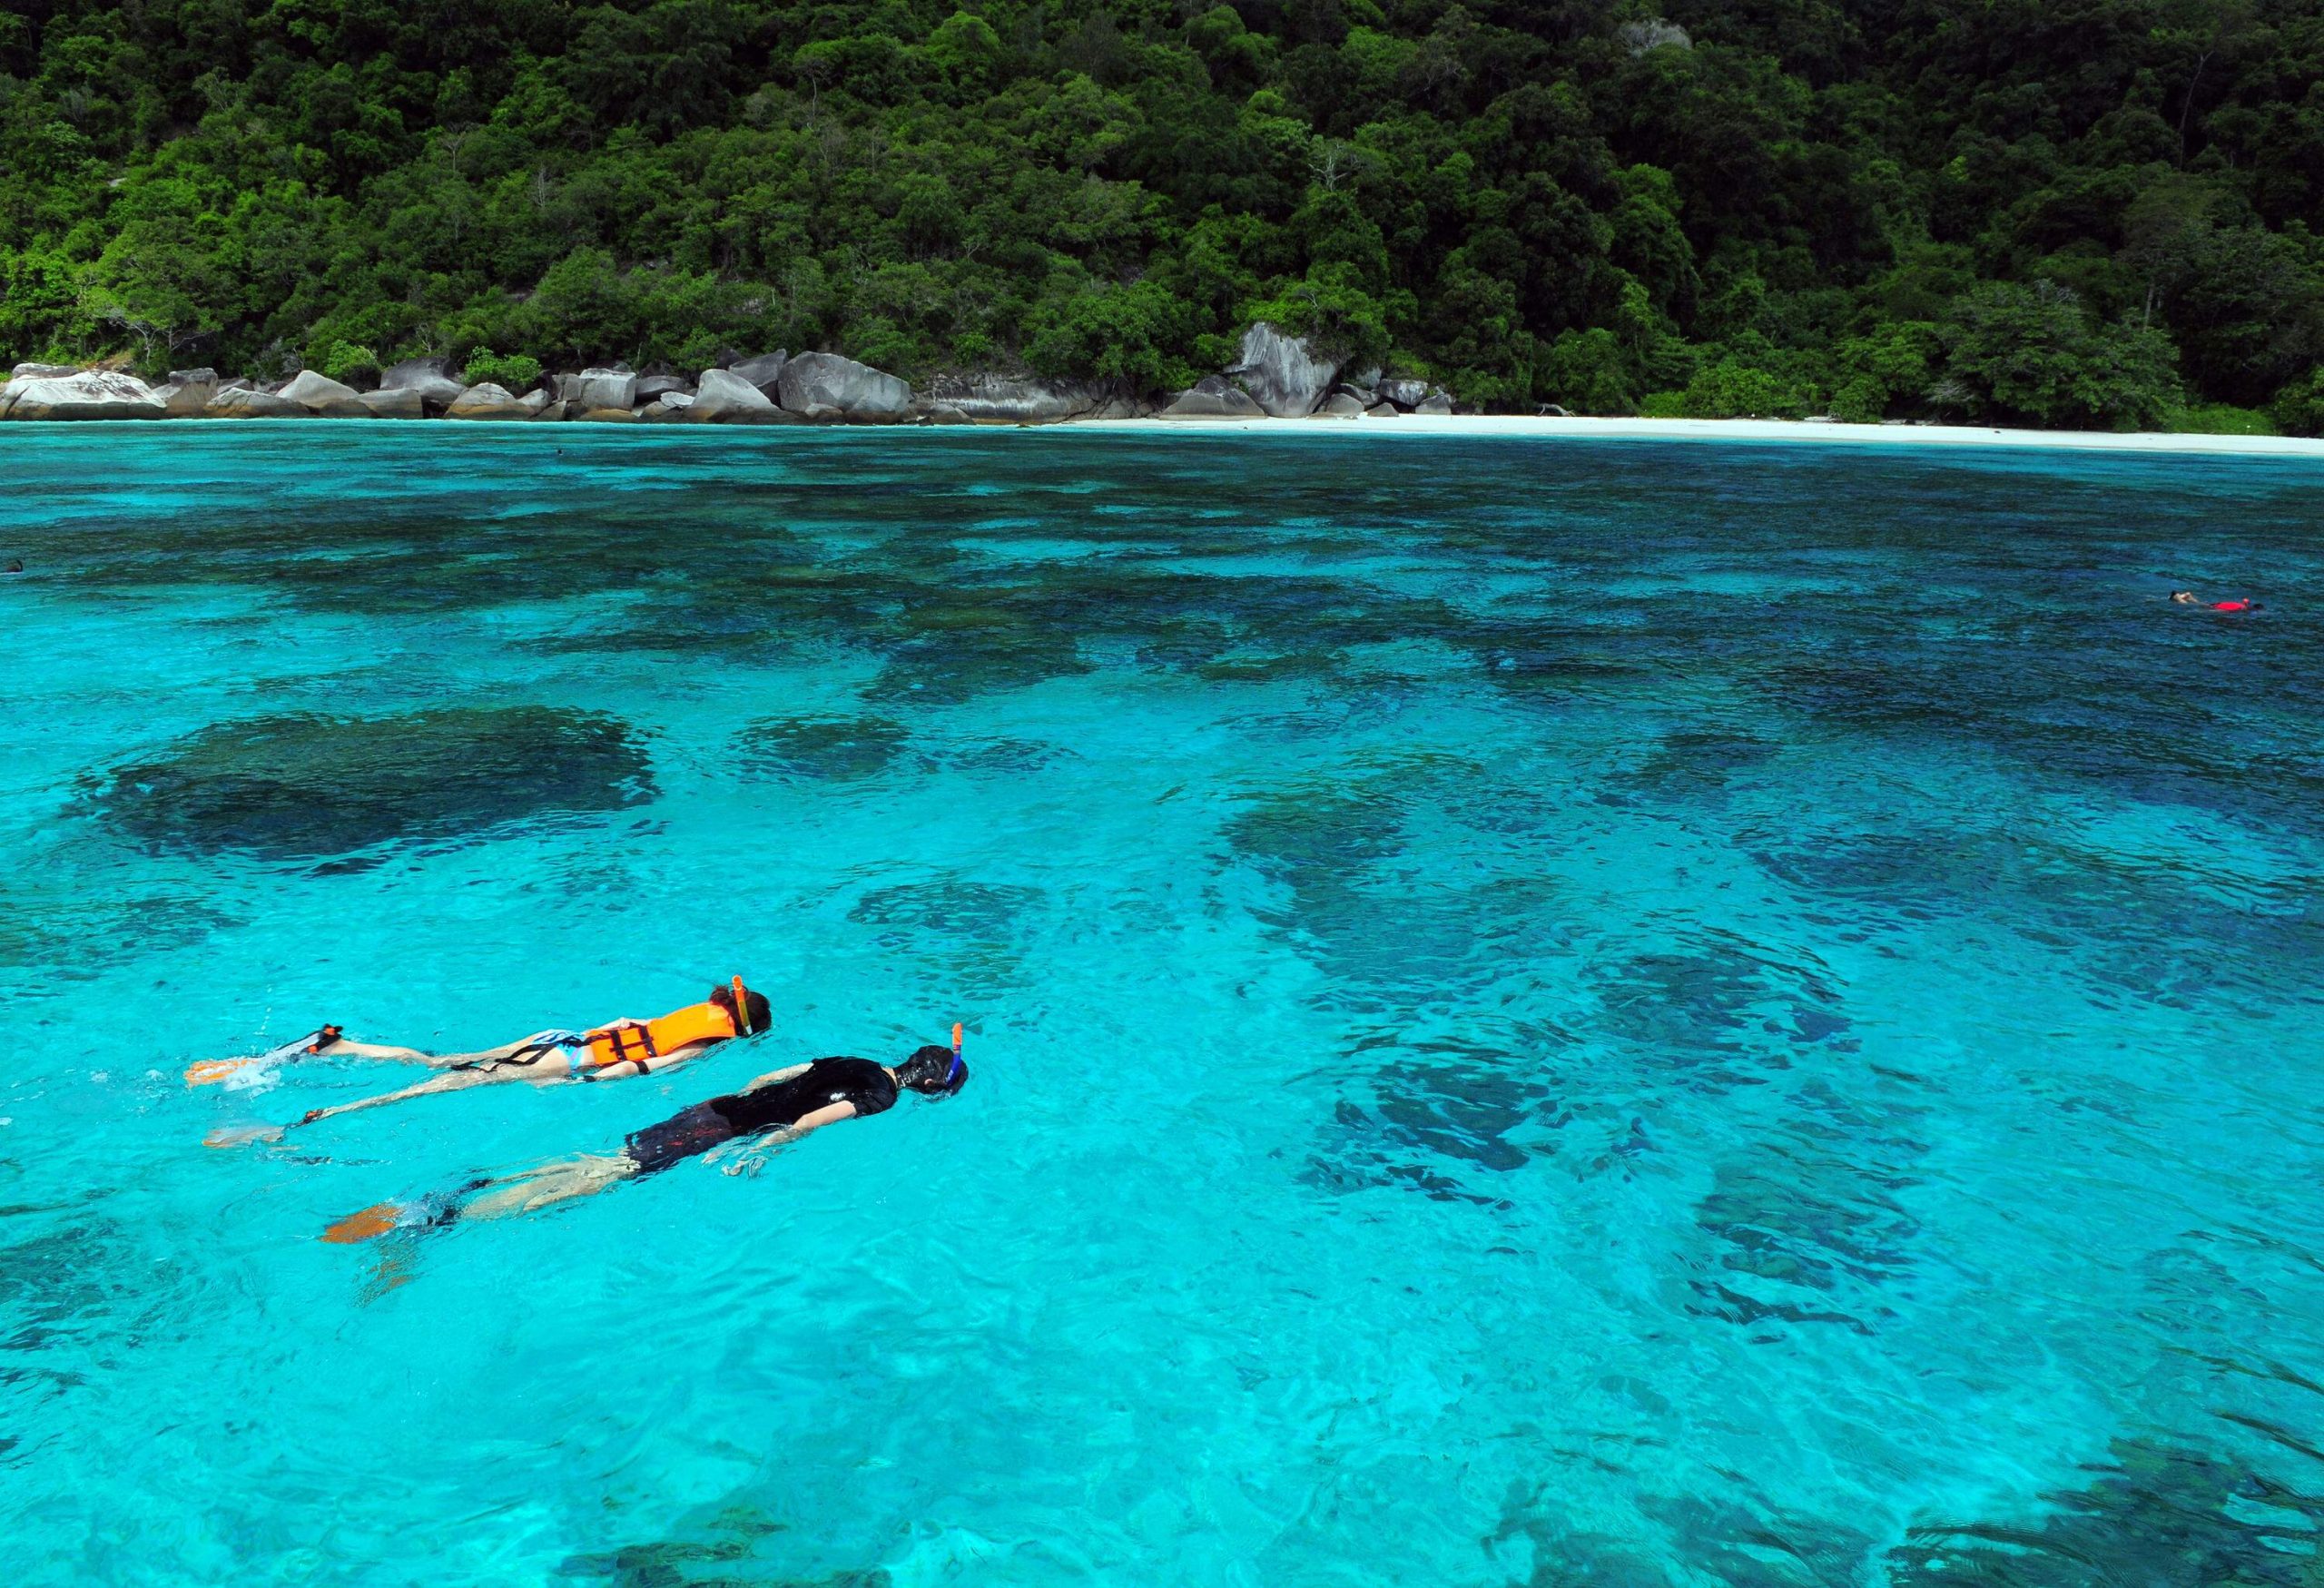 Two people snorkel in turquoise waters surrounded by forested islands.